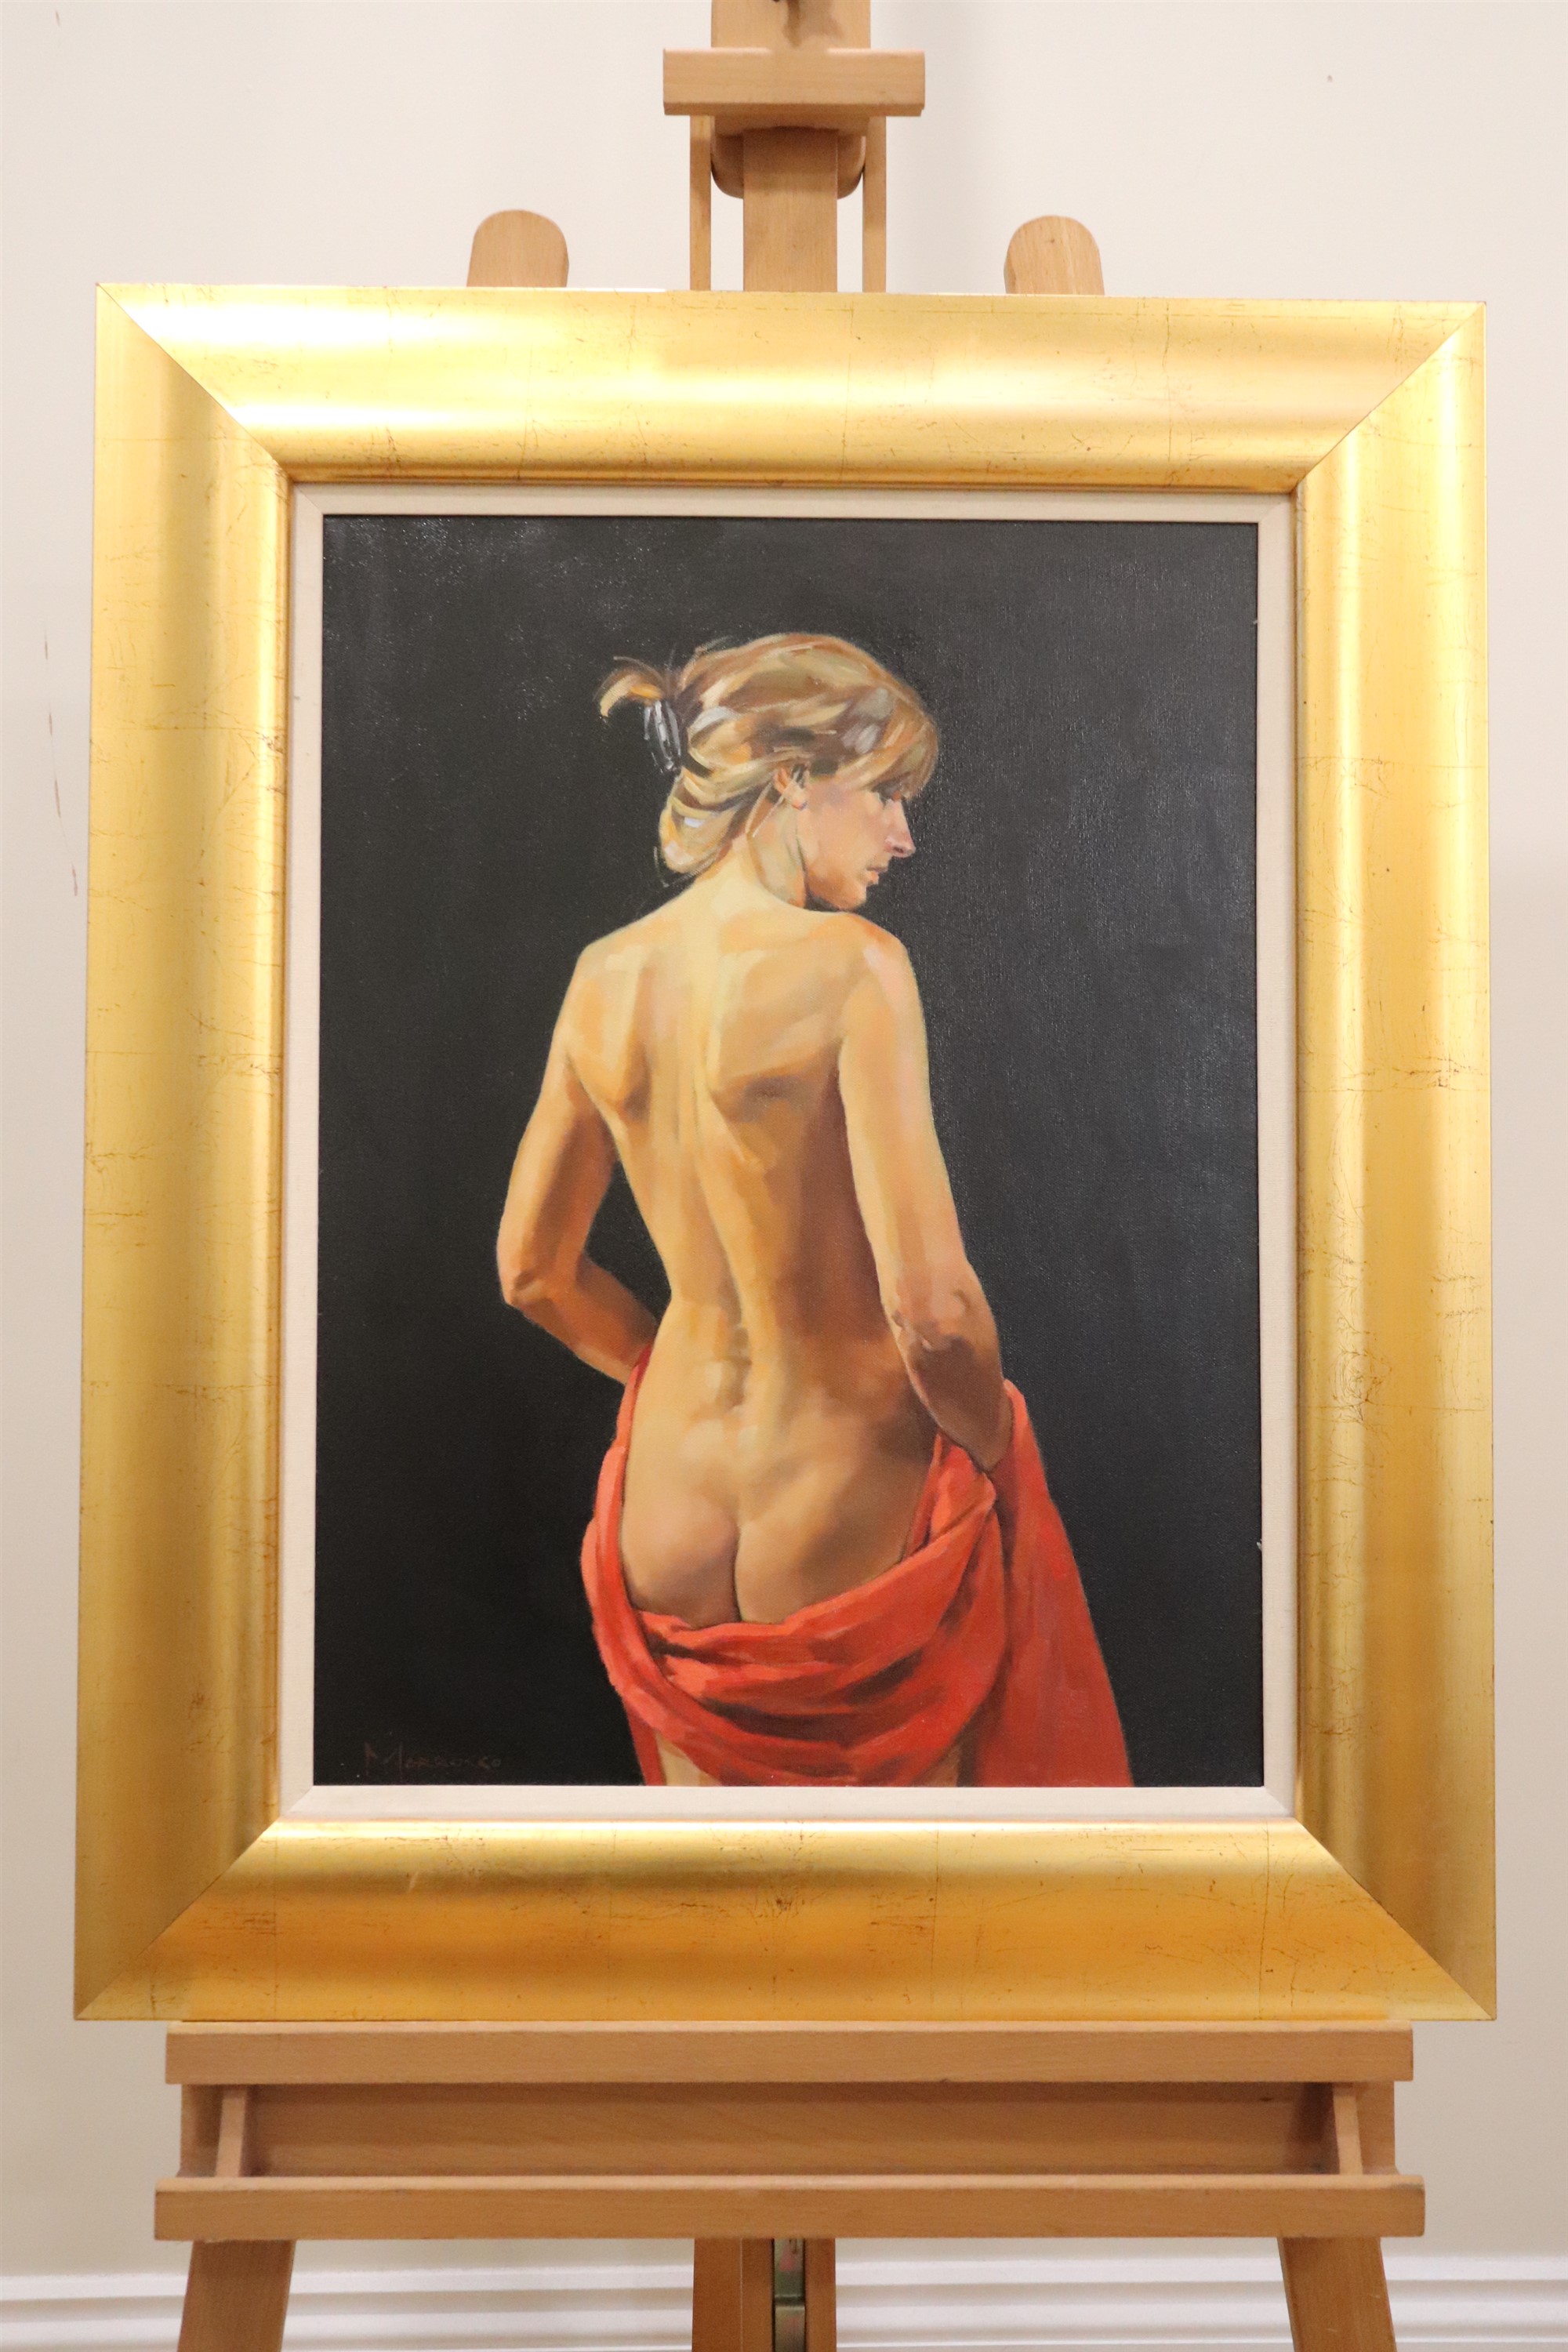 Jack Morrocco (Scottish, Contemporary) "Nude with red drape", chiaroscuro oil on canvas, Thompson' - Image 3 of 4